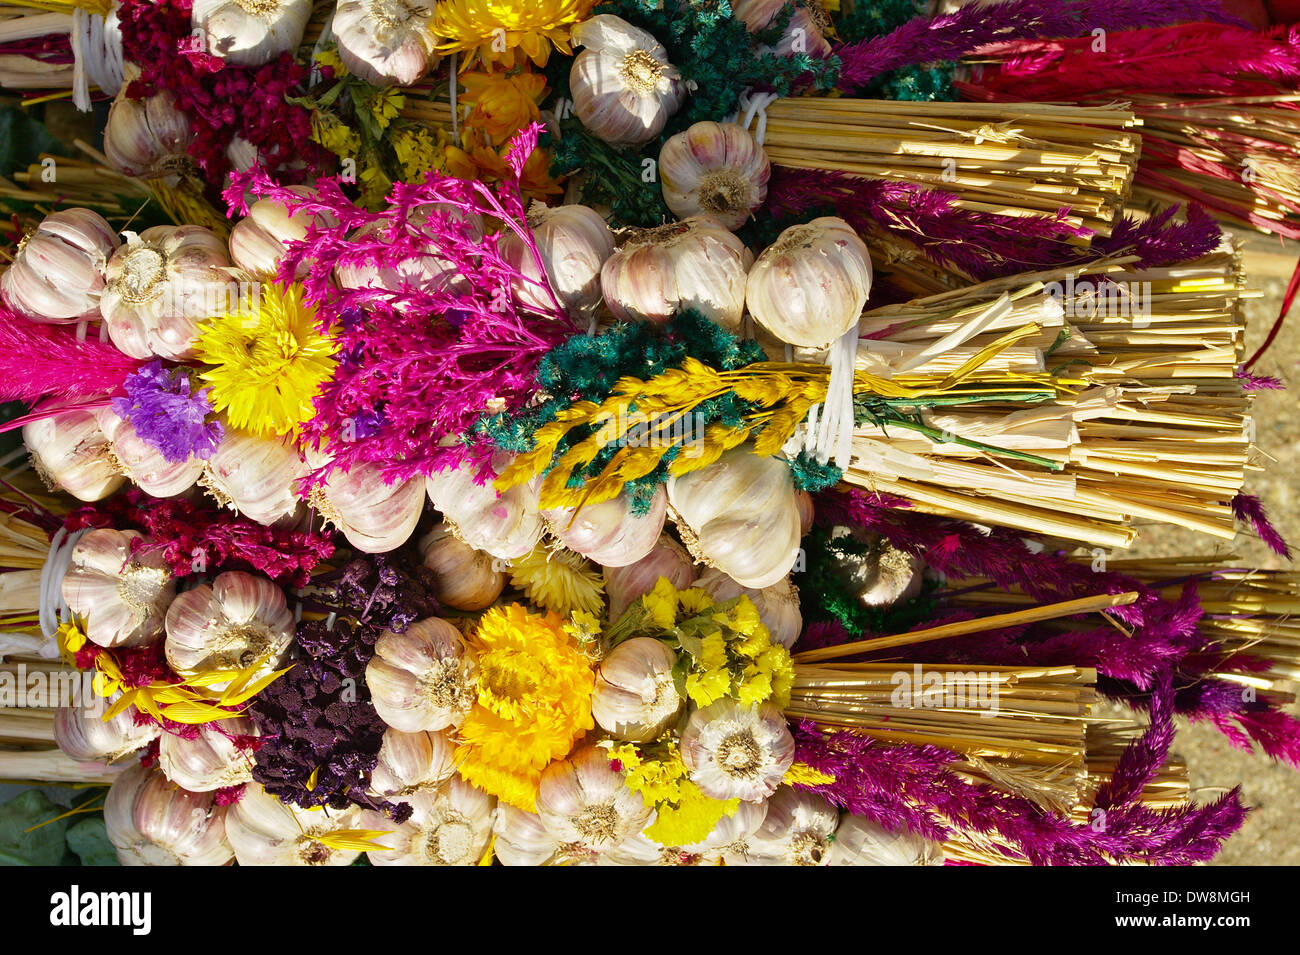 Strings of garlic decorated with colorful dried flowers Stock Photo